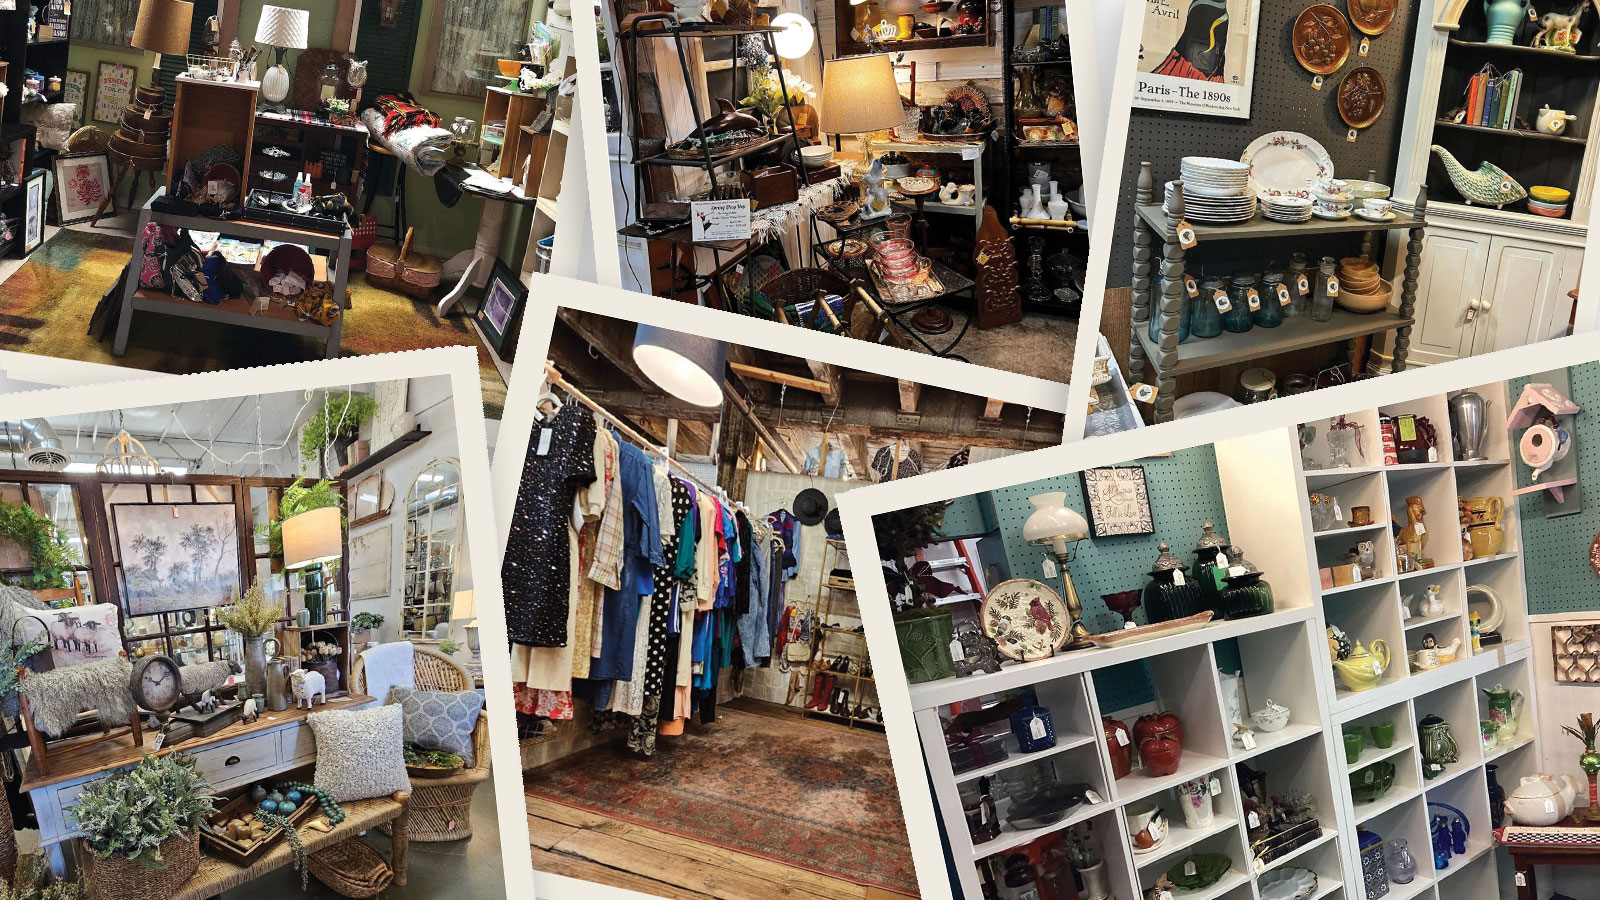 Show-Me Antiques - a collage of photos from the antique shops in the story.